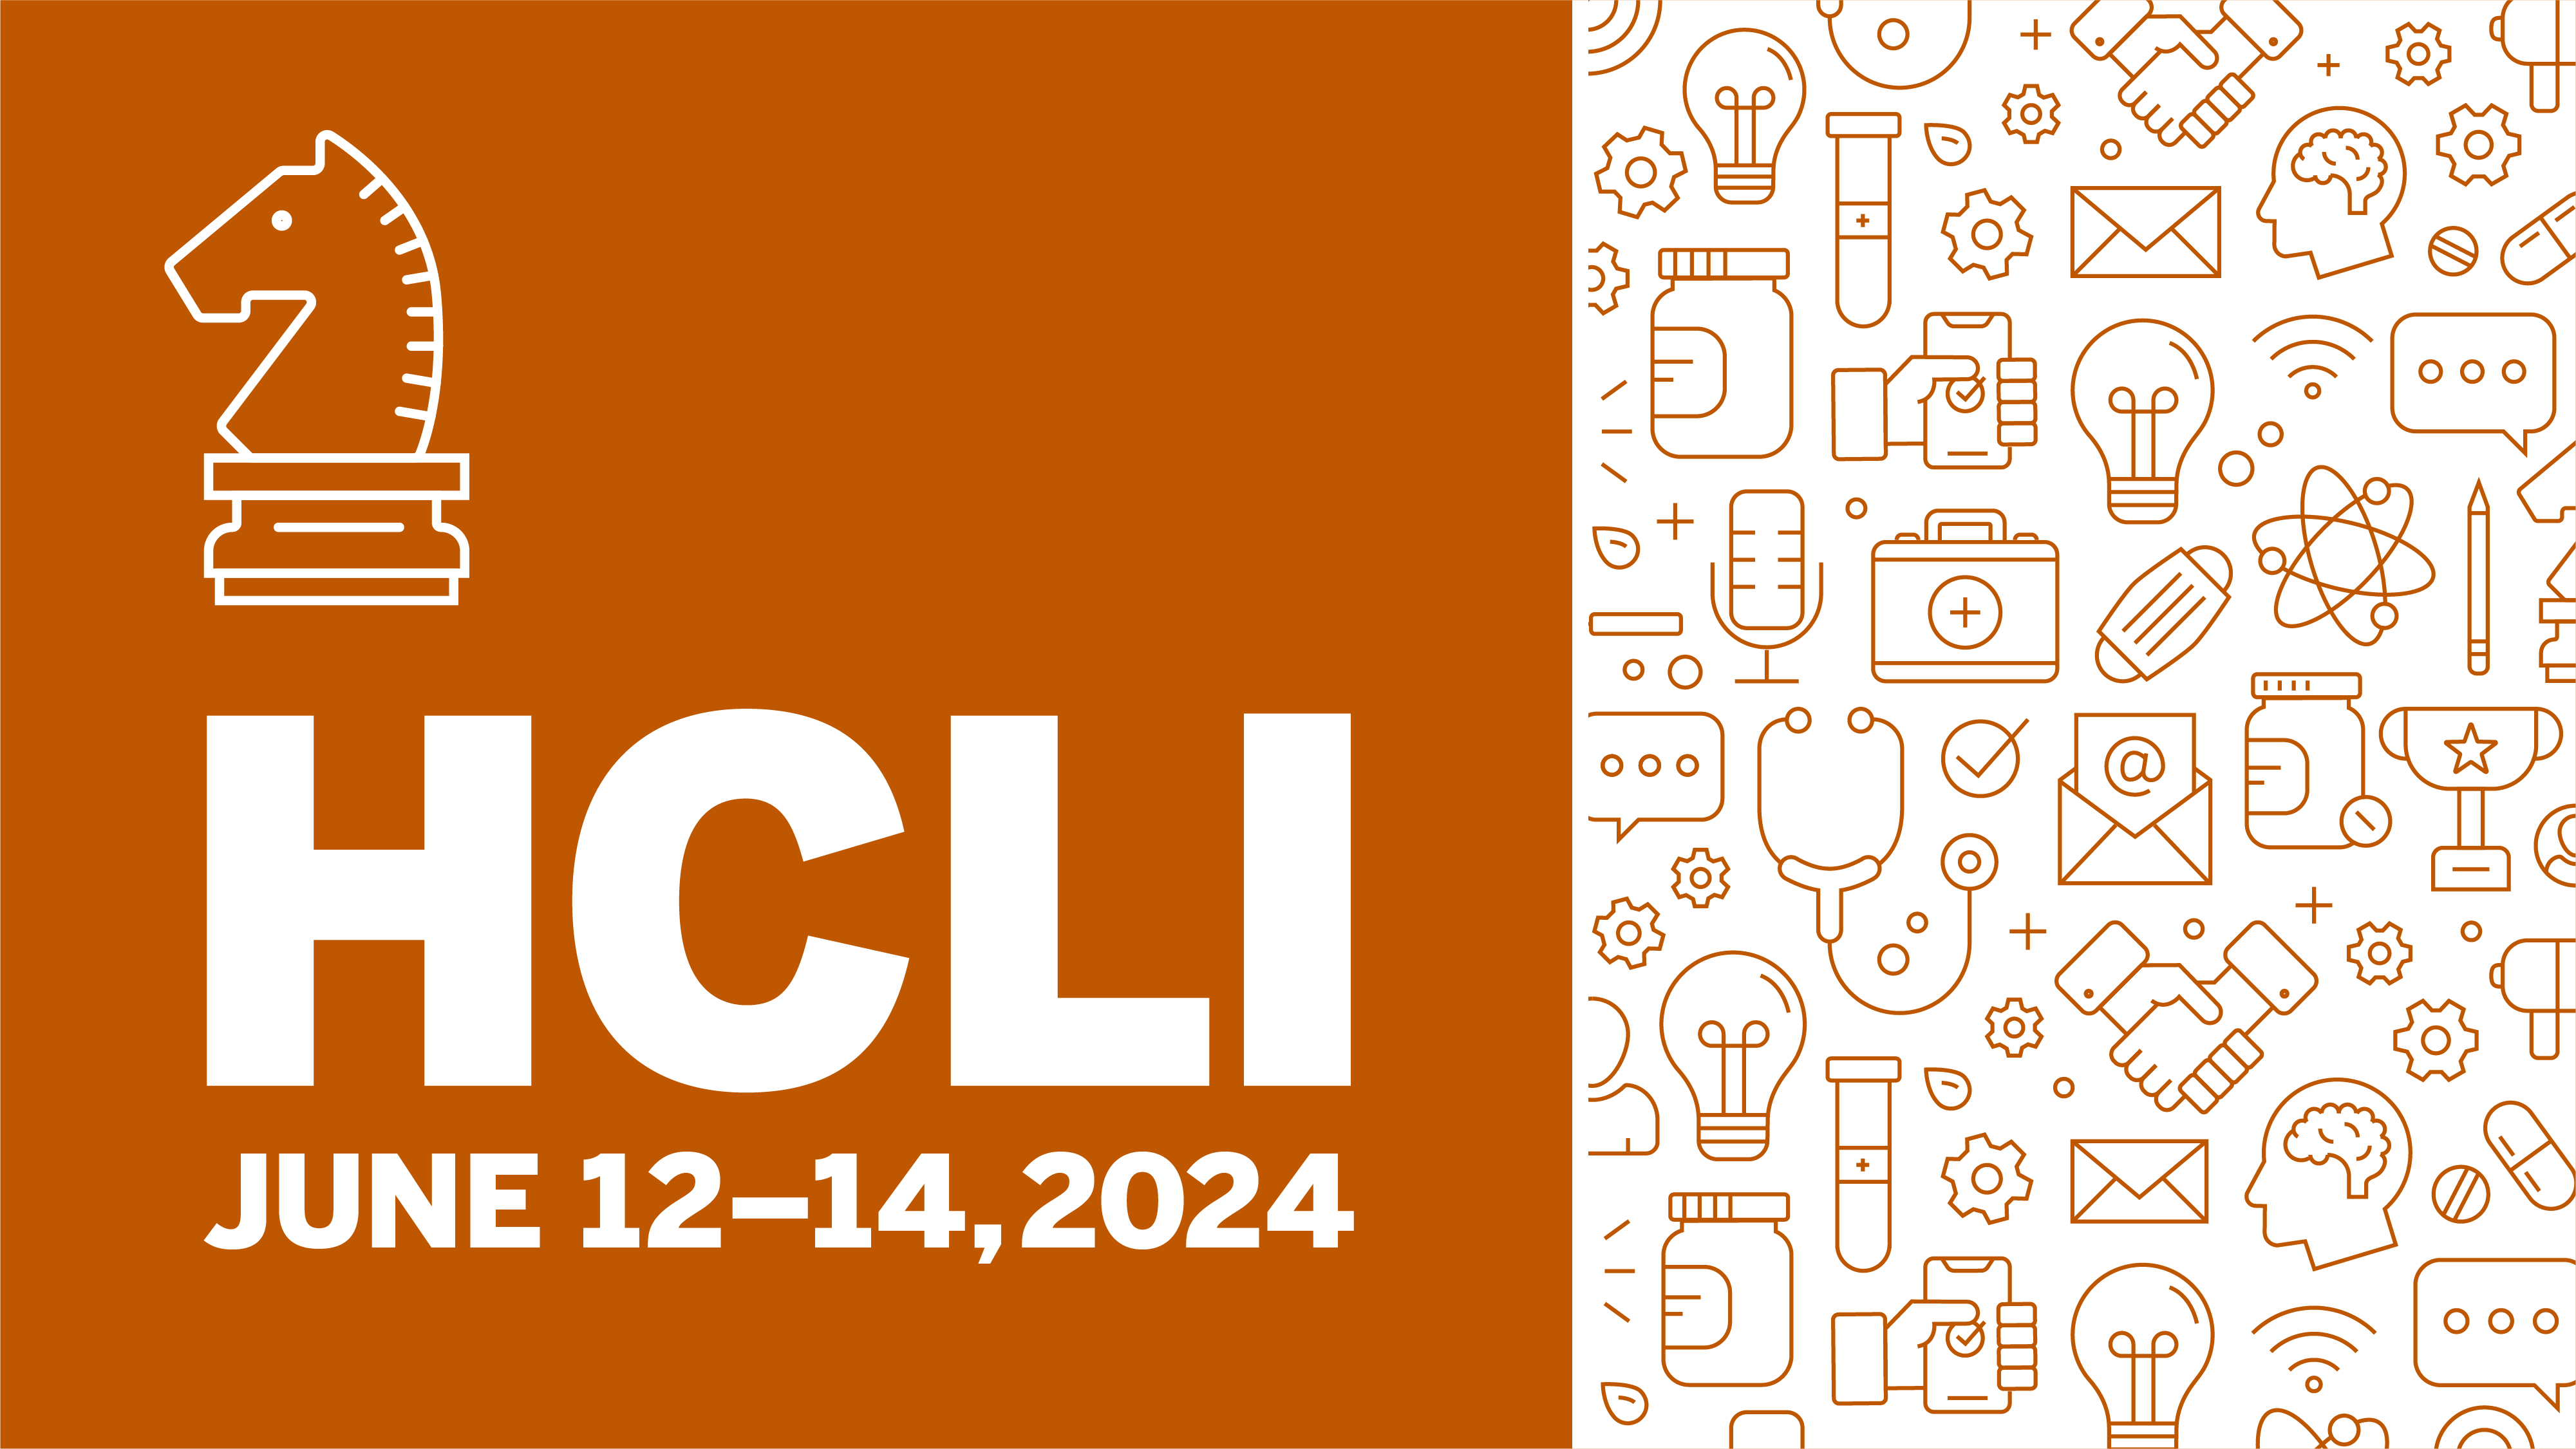 Left half of the graphic is a burn orange background with a small outline of a chess piece in white and white text reading HCLI June 12-14, 2024. The right half of the graphic is a white background with various science, health, and communication icon outlines in burn orange.